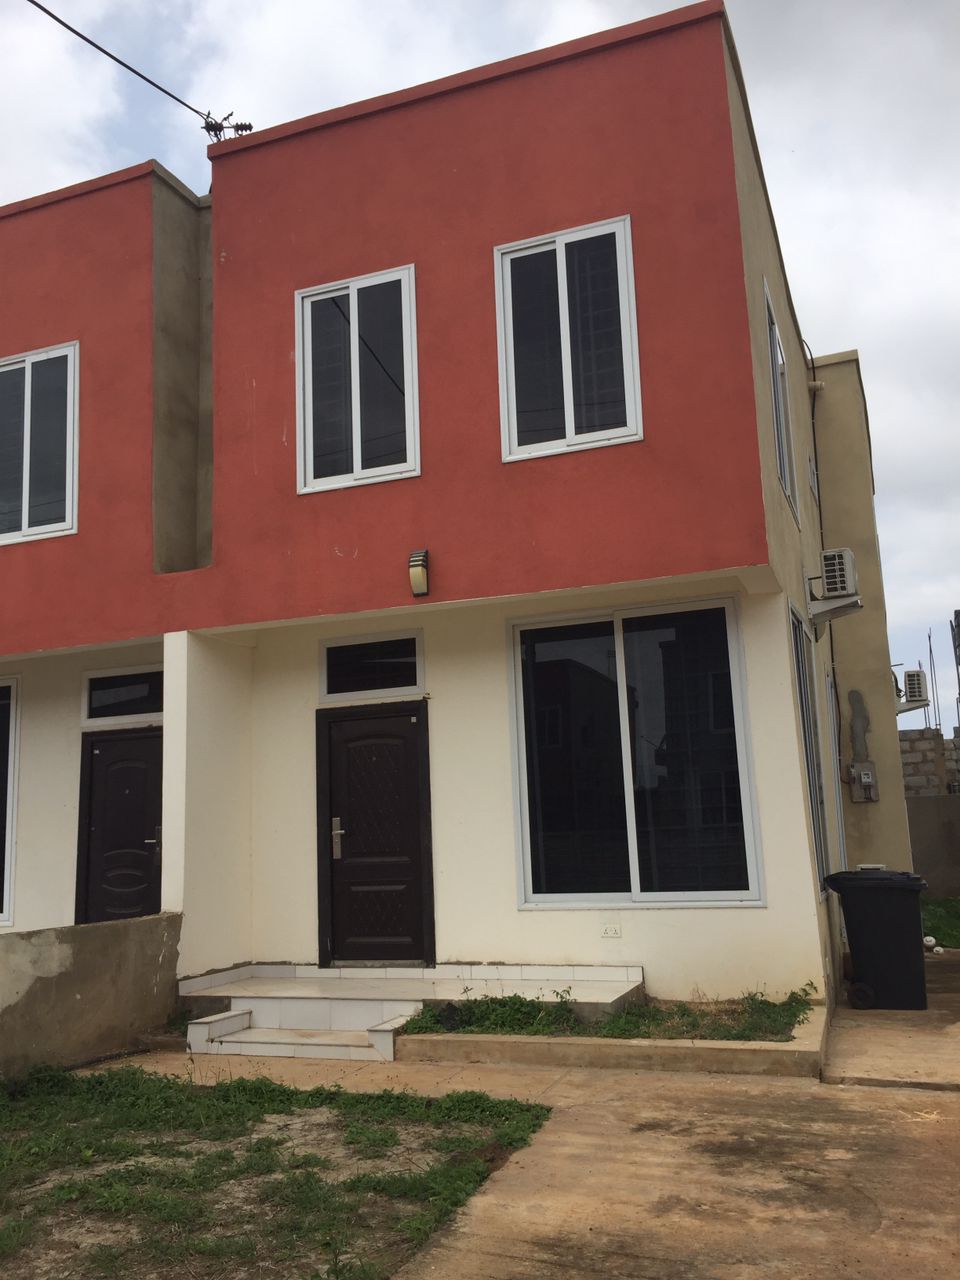 Two 2-Bedroom Semi-Detached House For Sale At East Legon Hills